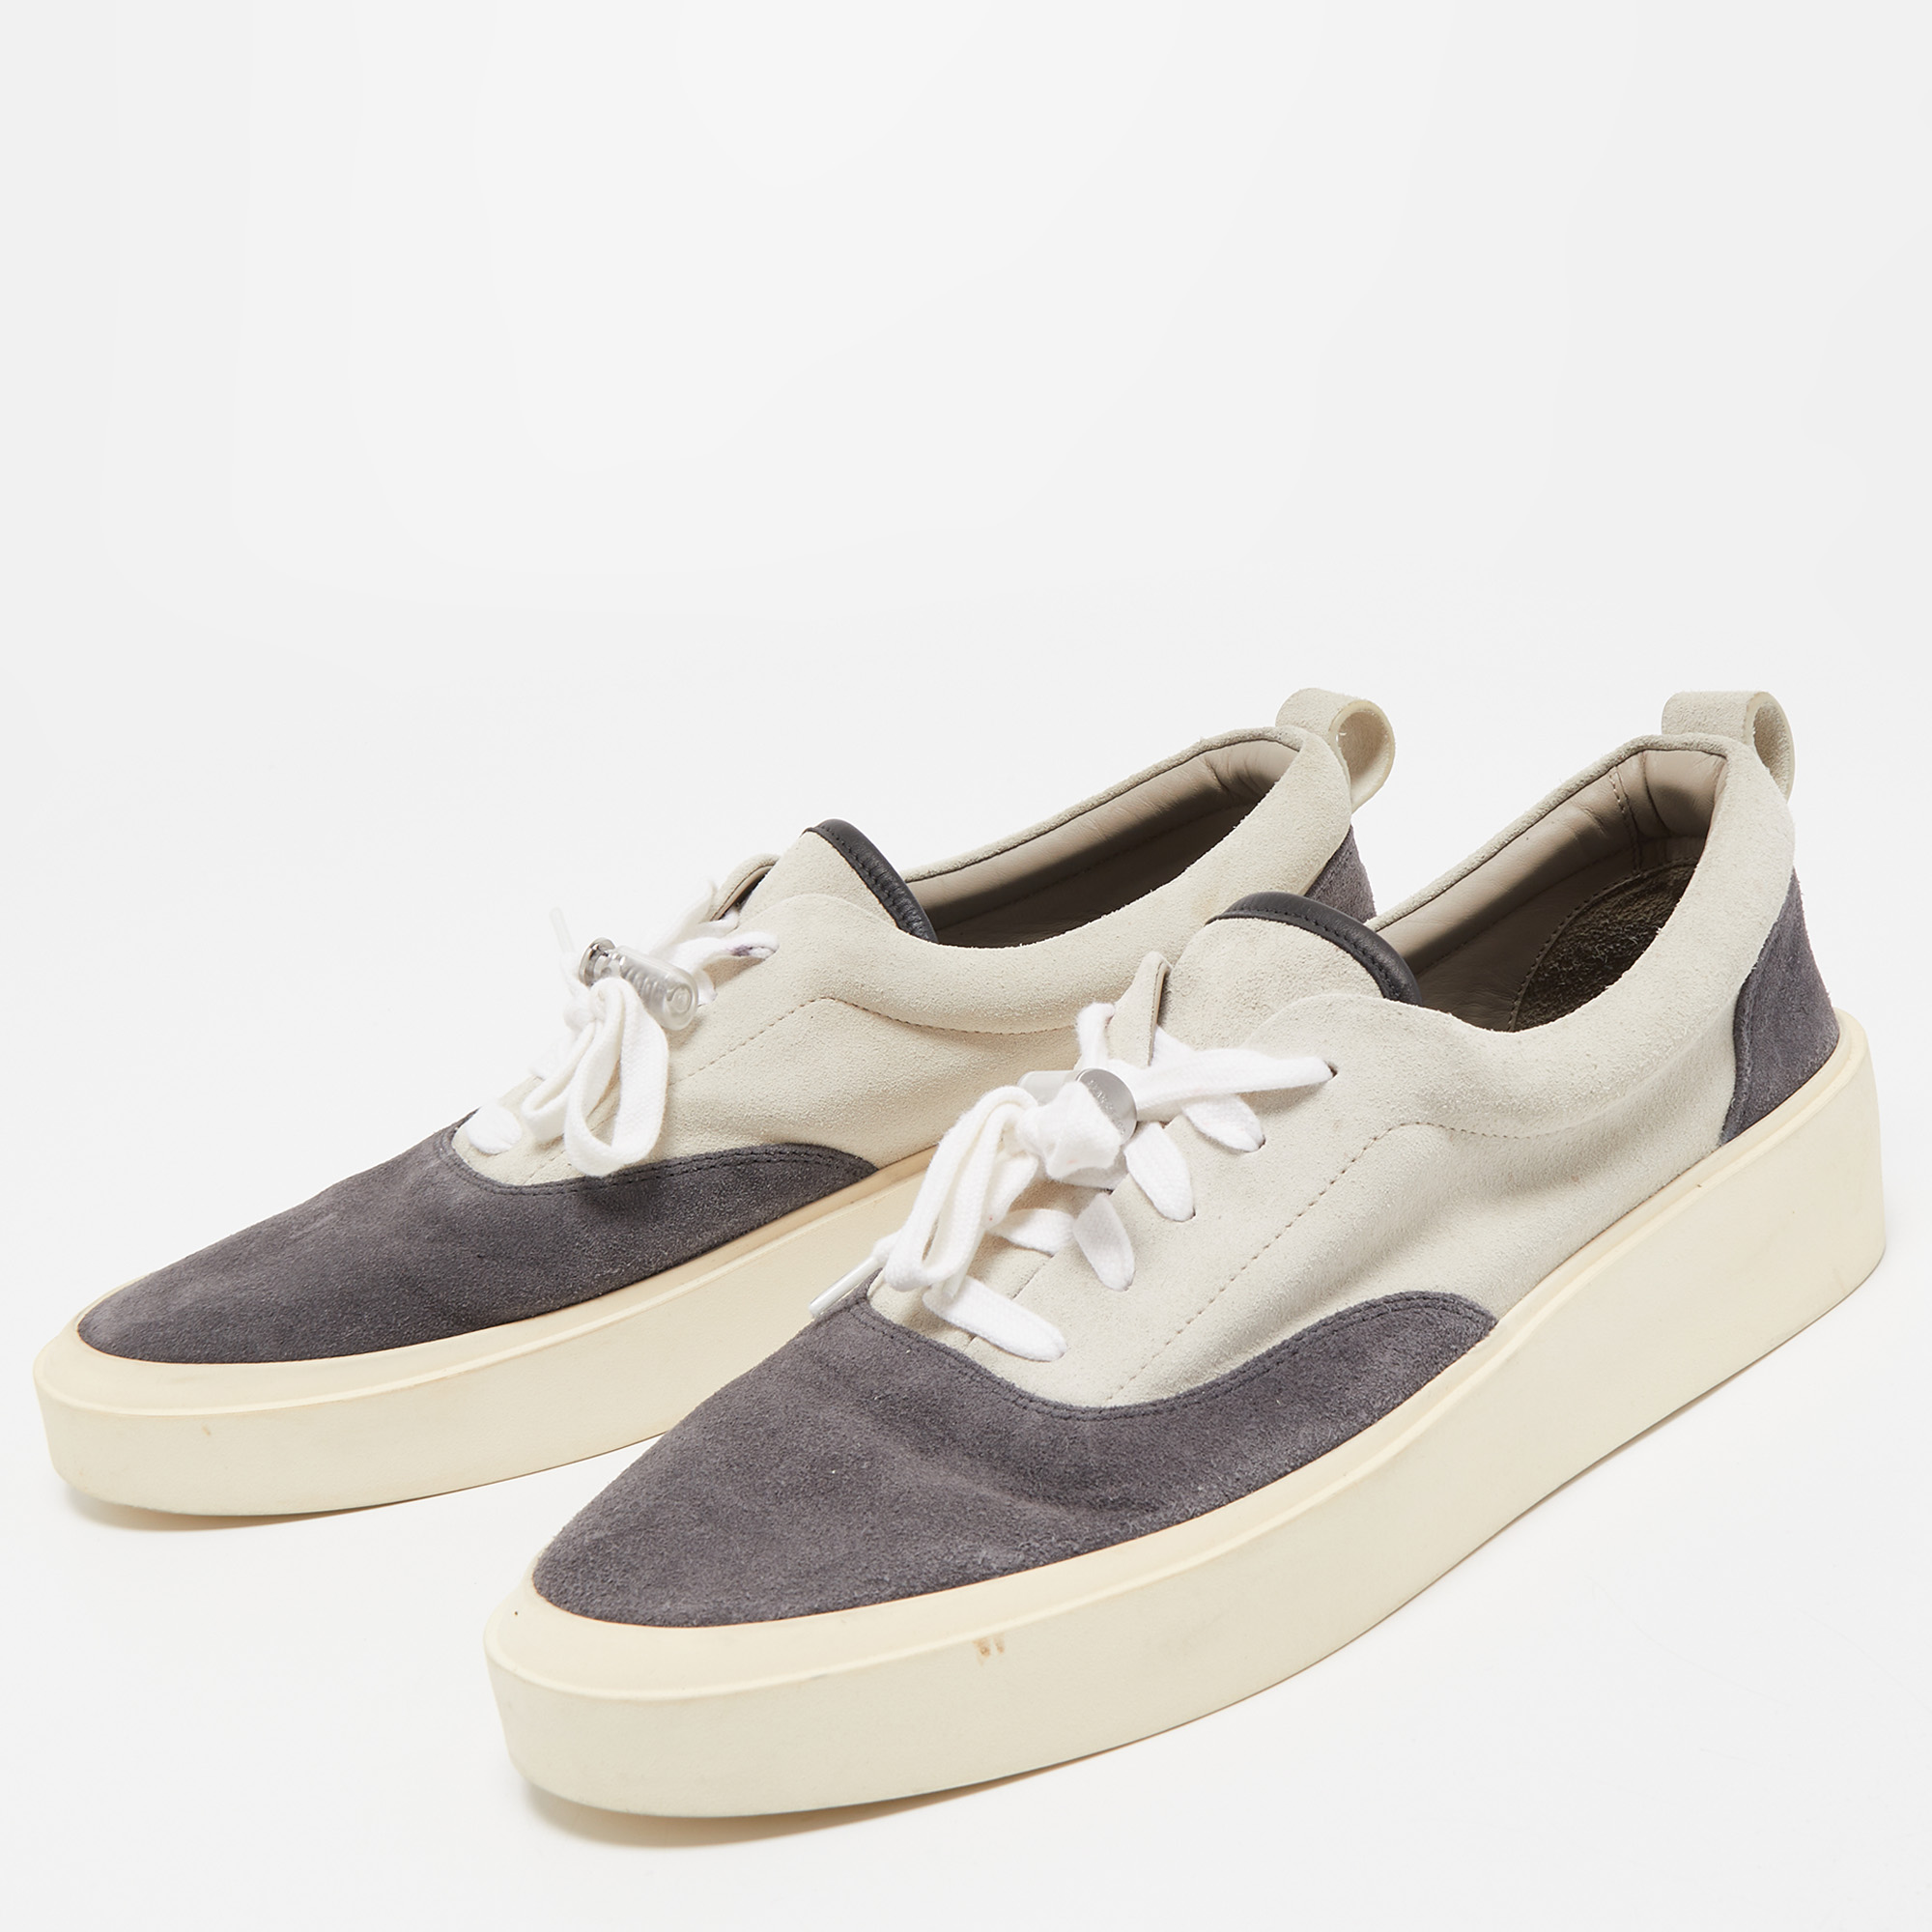 

Fear Of God Two Tone Suede Low Top Sneakers Size, Grey